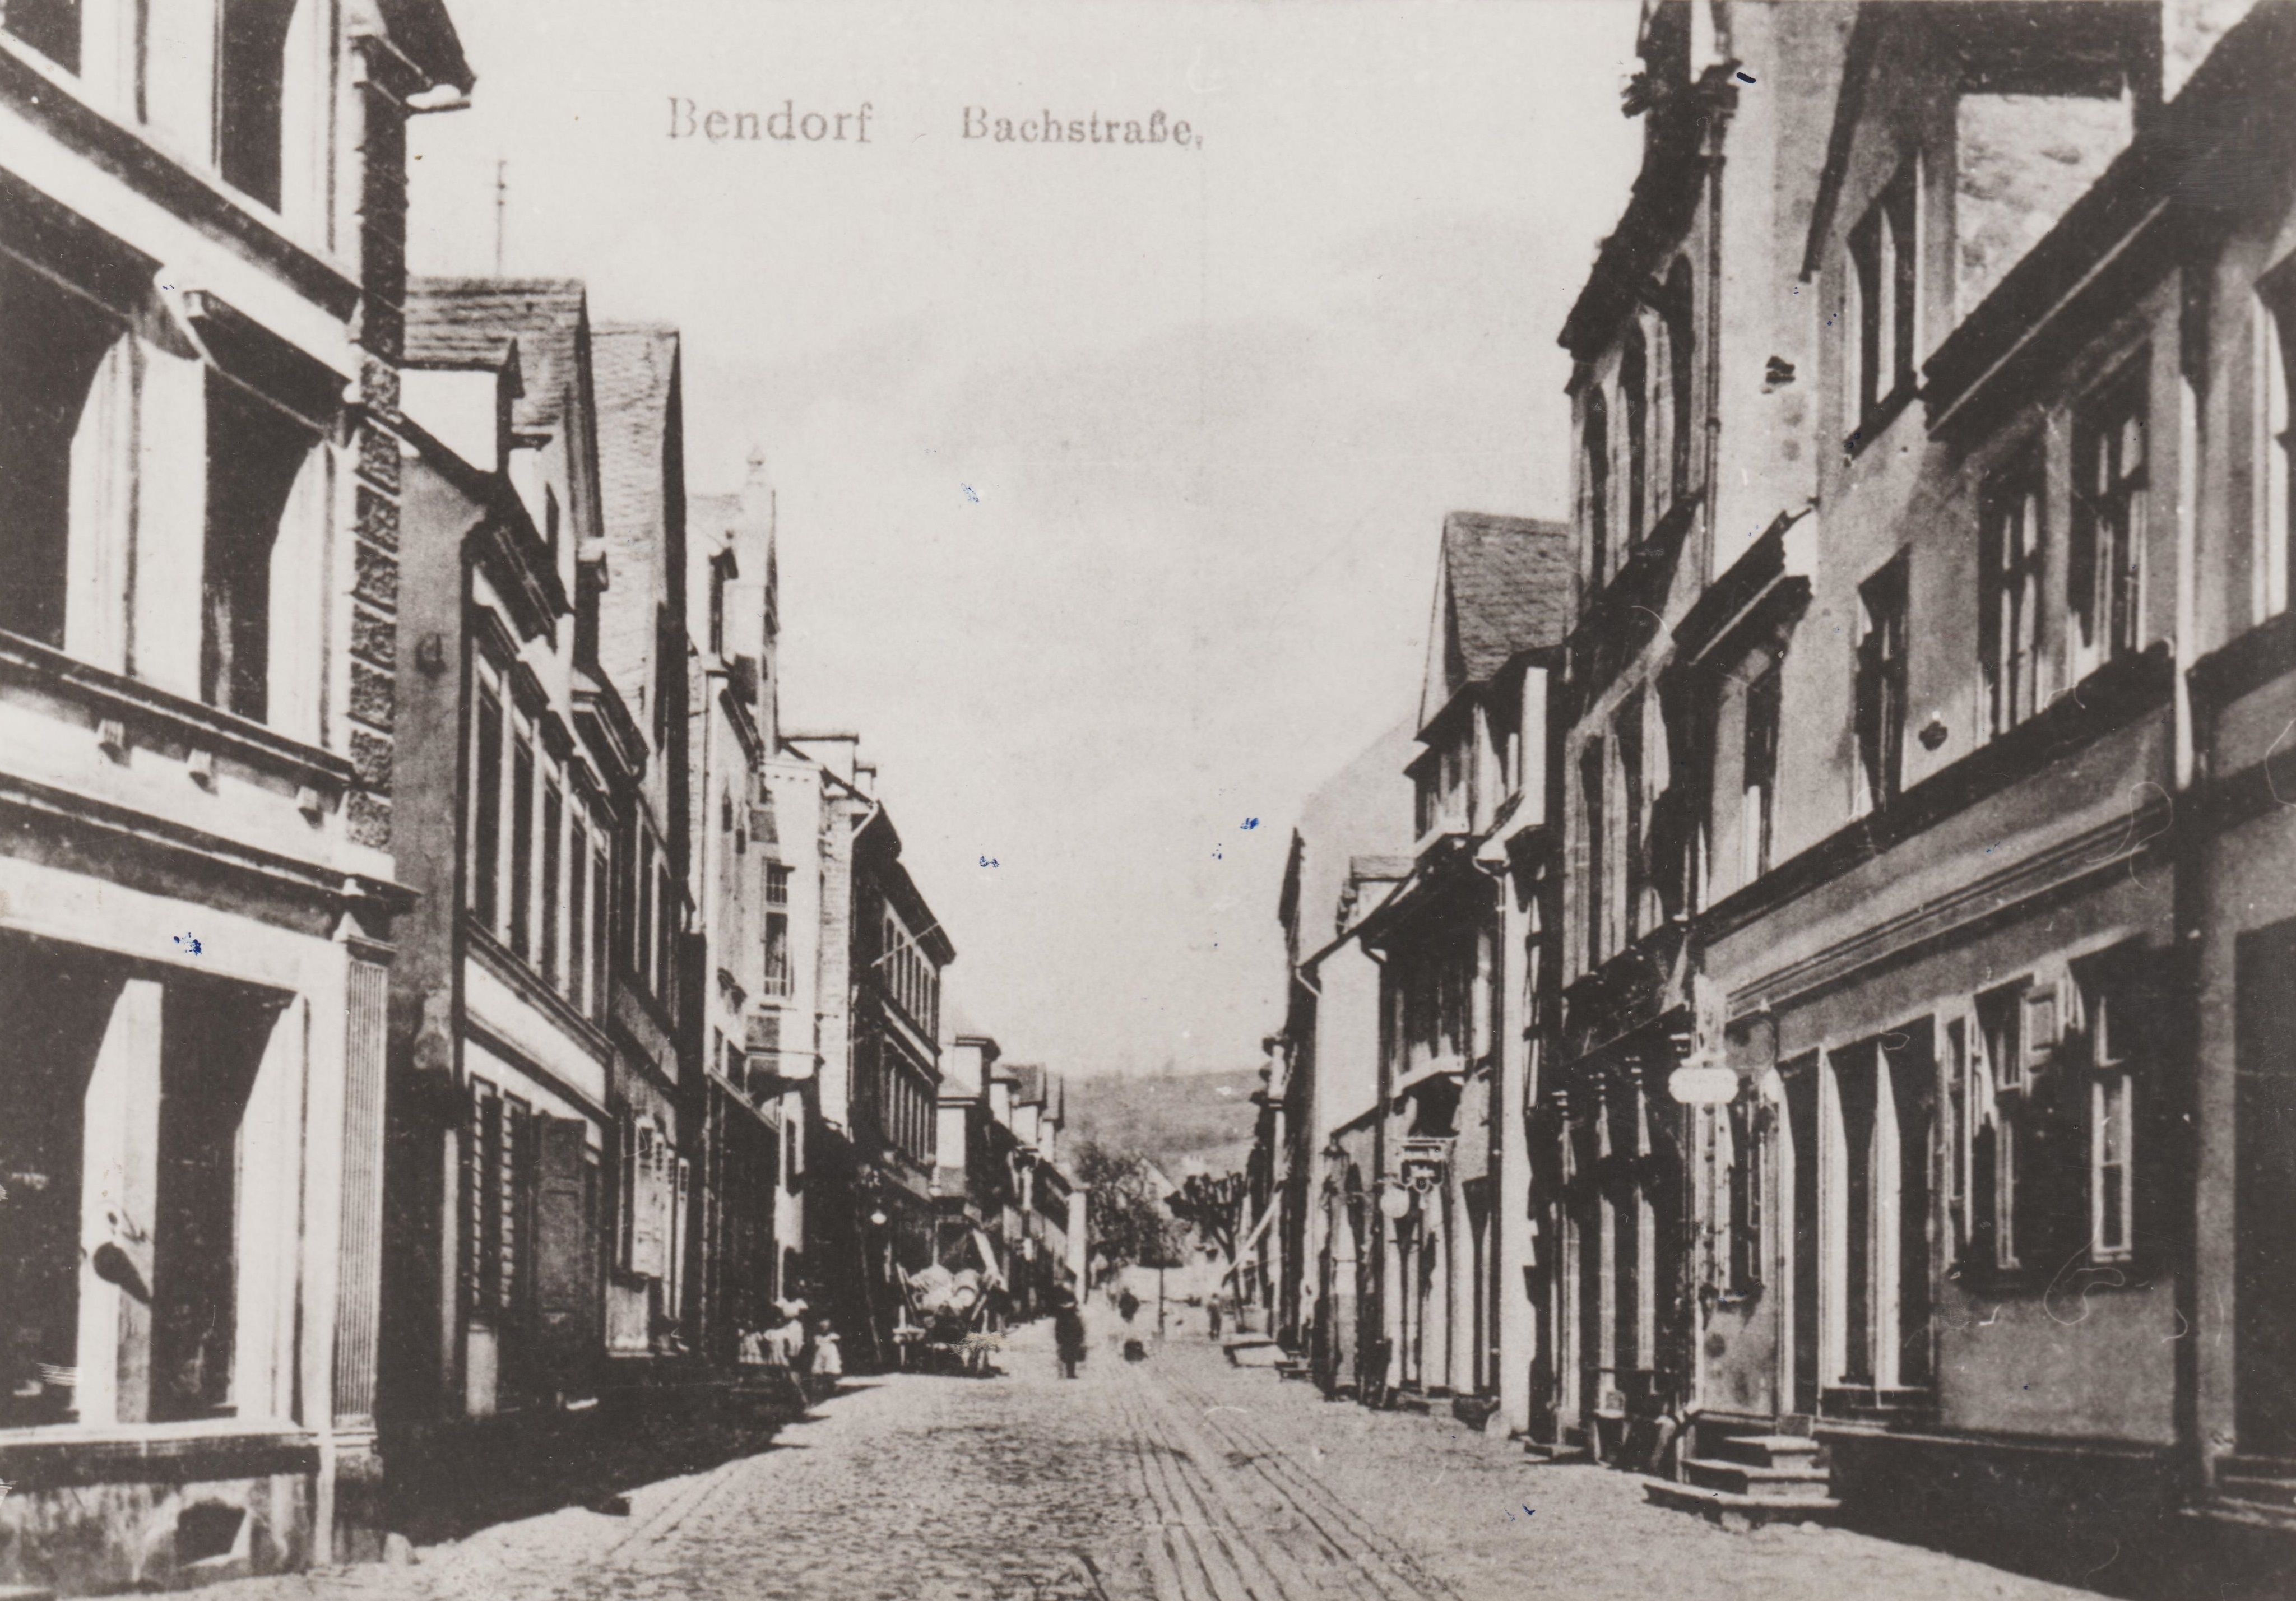 Mittlere Bachstrasse in Bendorf um 1910 (REM CC BY-NC-SA)